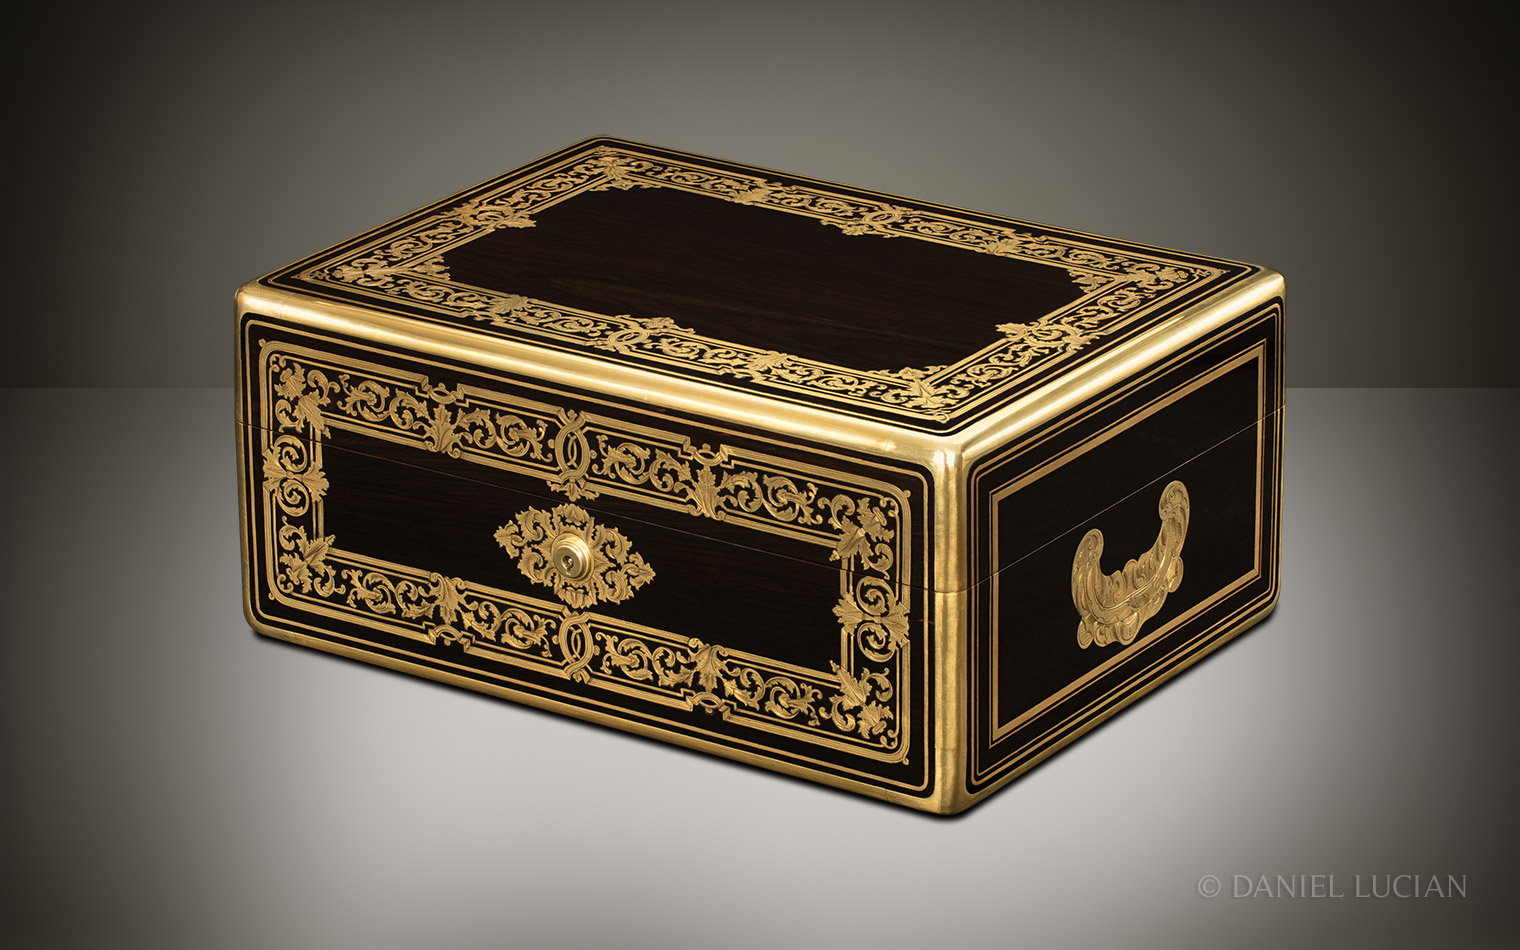 Antique Nécessaire de Voyage Dressing Case in Ebony with Foliate Brass Inlay, Belonging to the Viscount and Viscountess de Montreuil